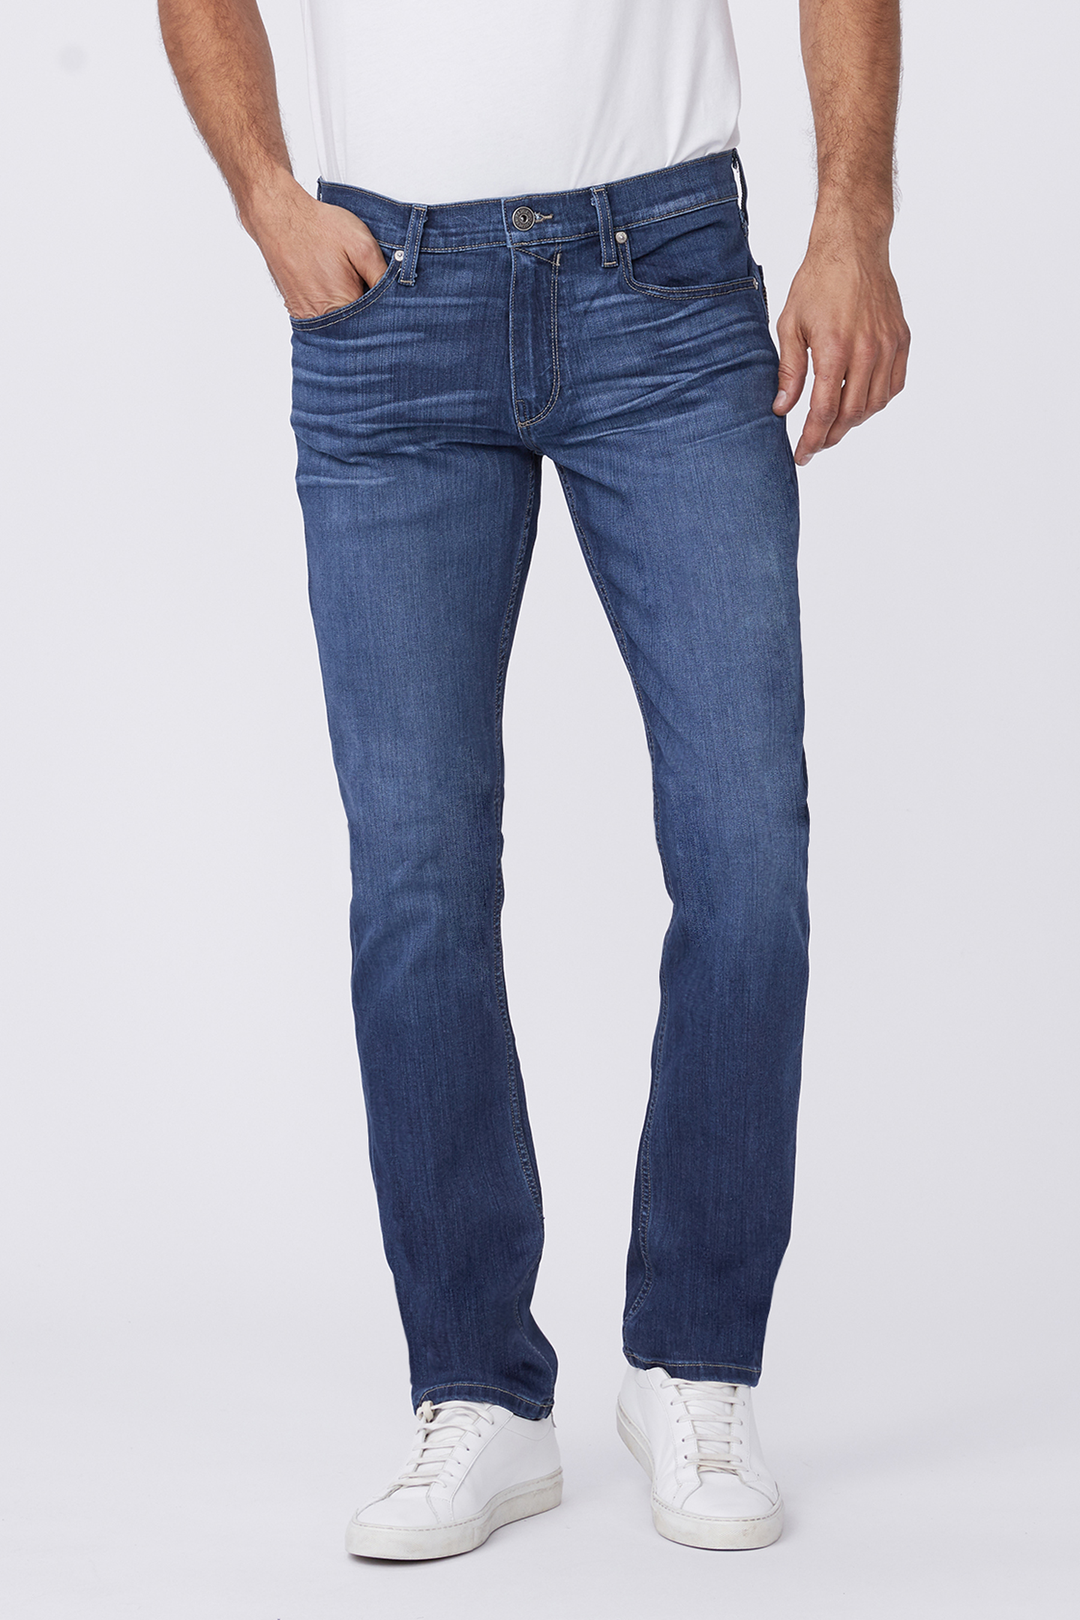 Paige - Federal Jeans in Leo